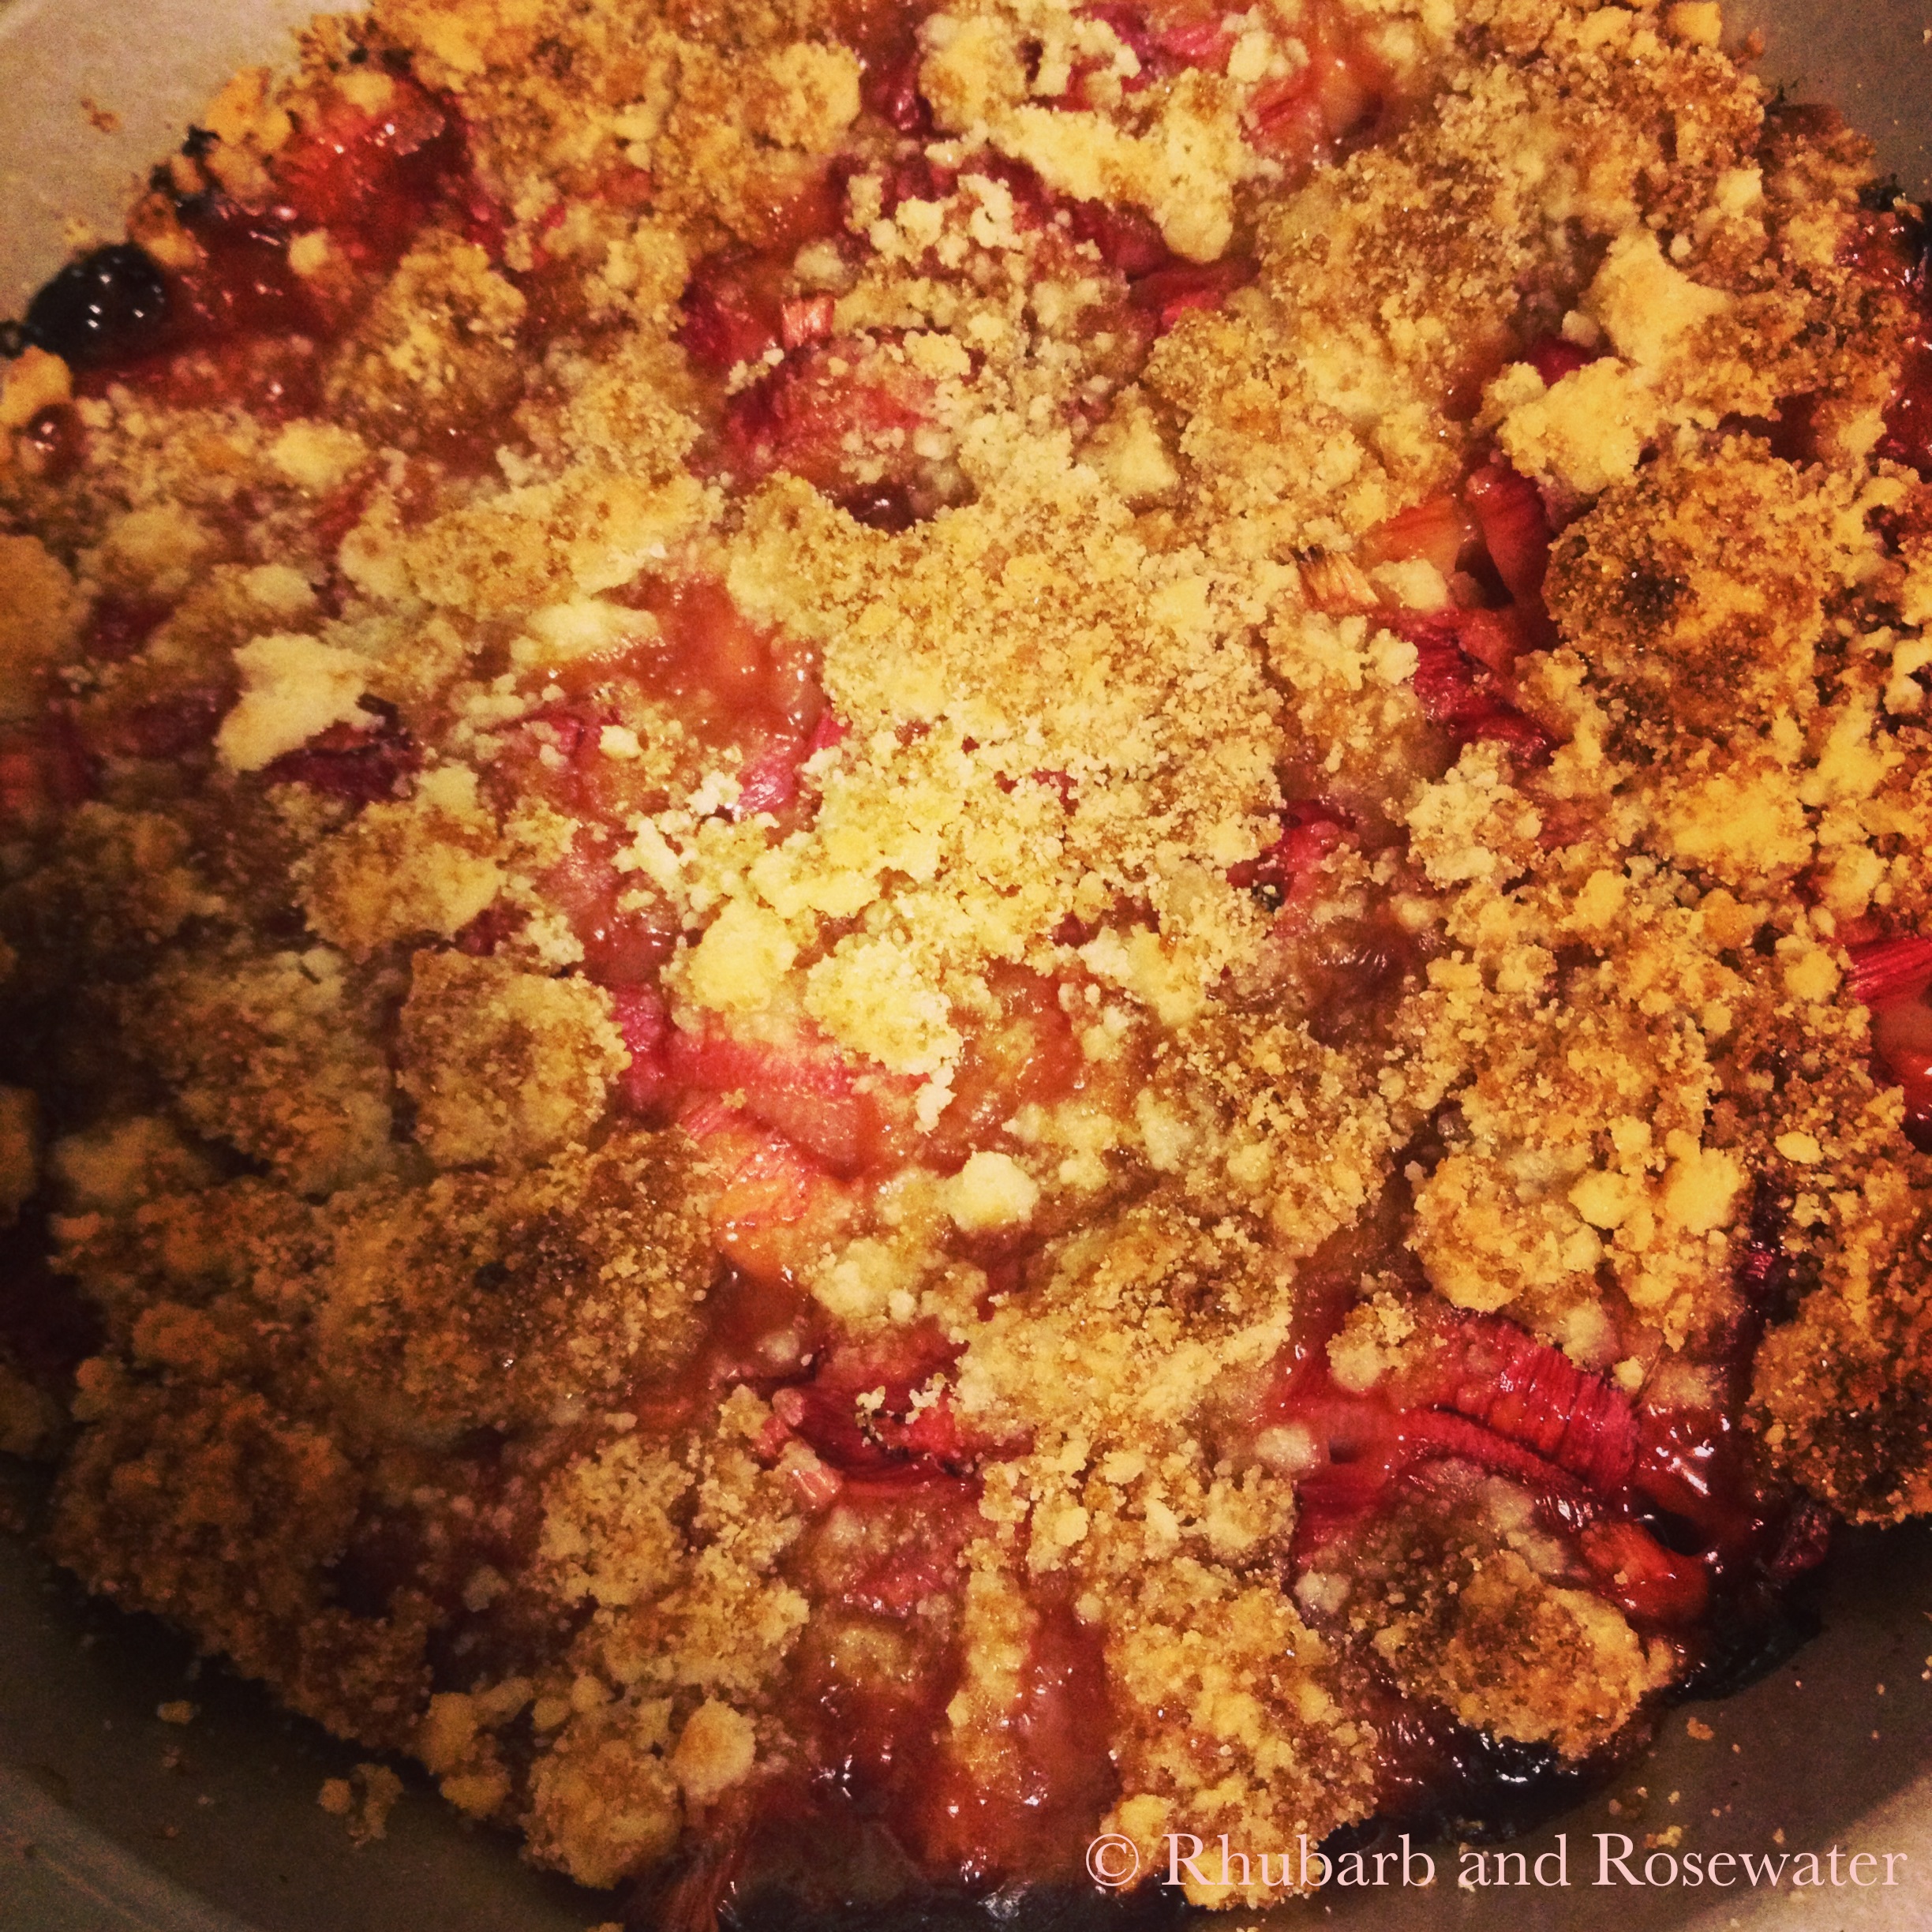 Perhaps the best dessert I ever had: Green Apple and Rhubarb Crumble